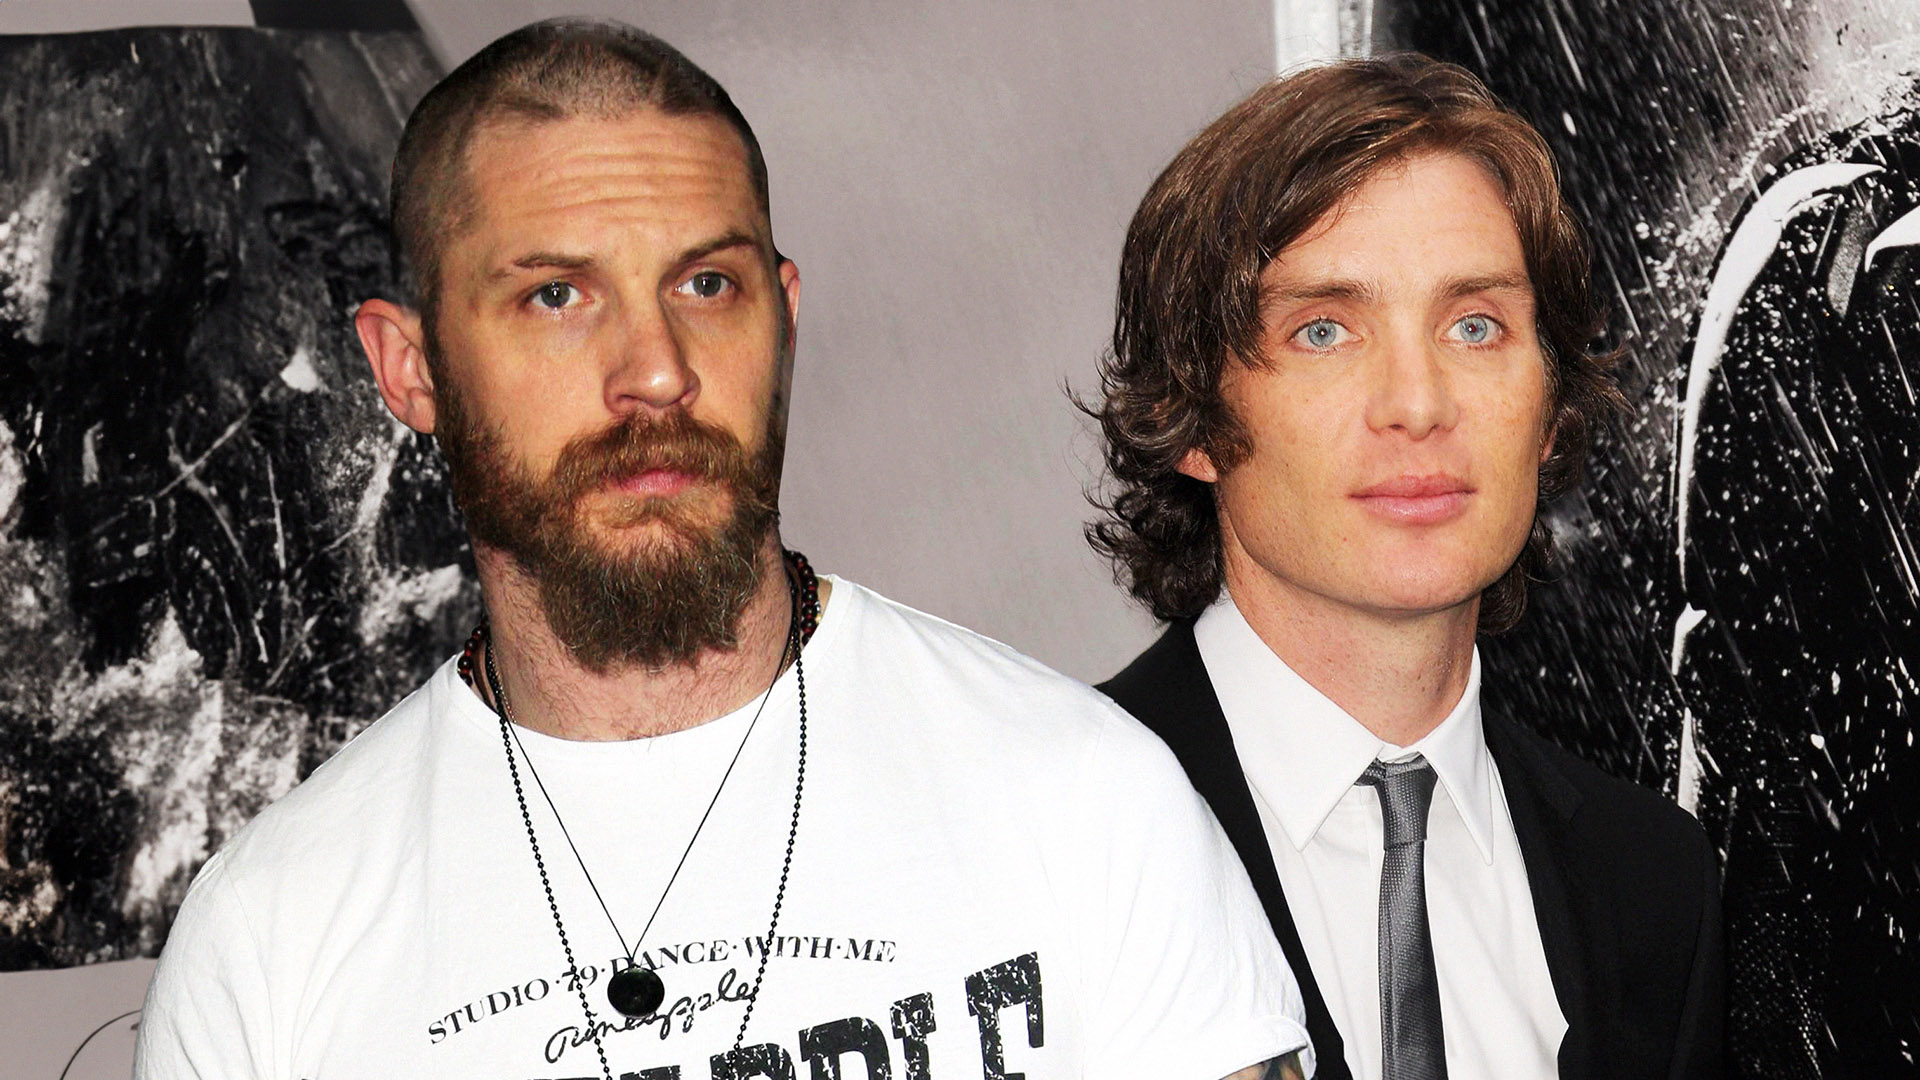 Cillian Murphy and Tom Hardy Did 4 Movies & TV Series Together: Here's the List